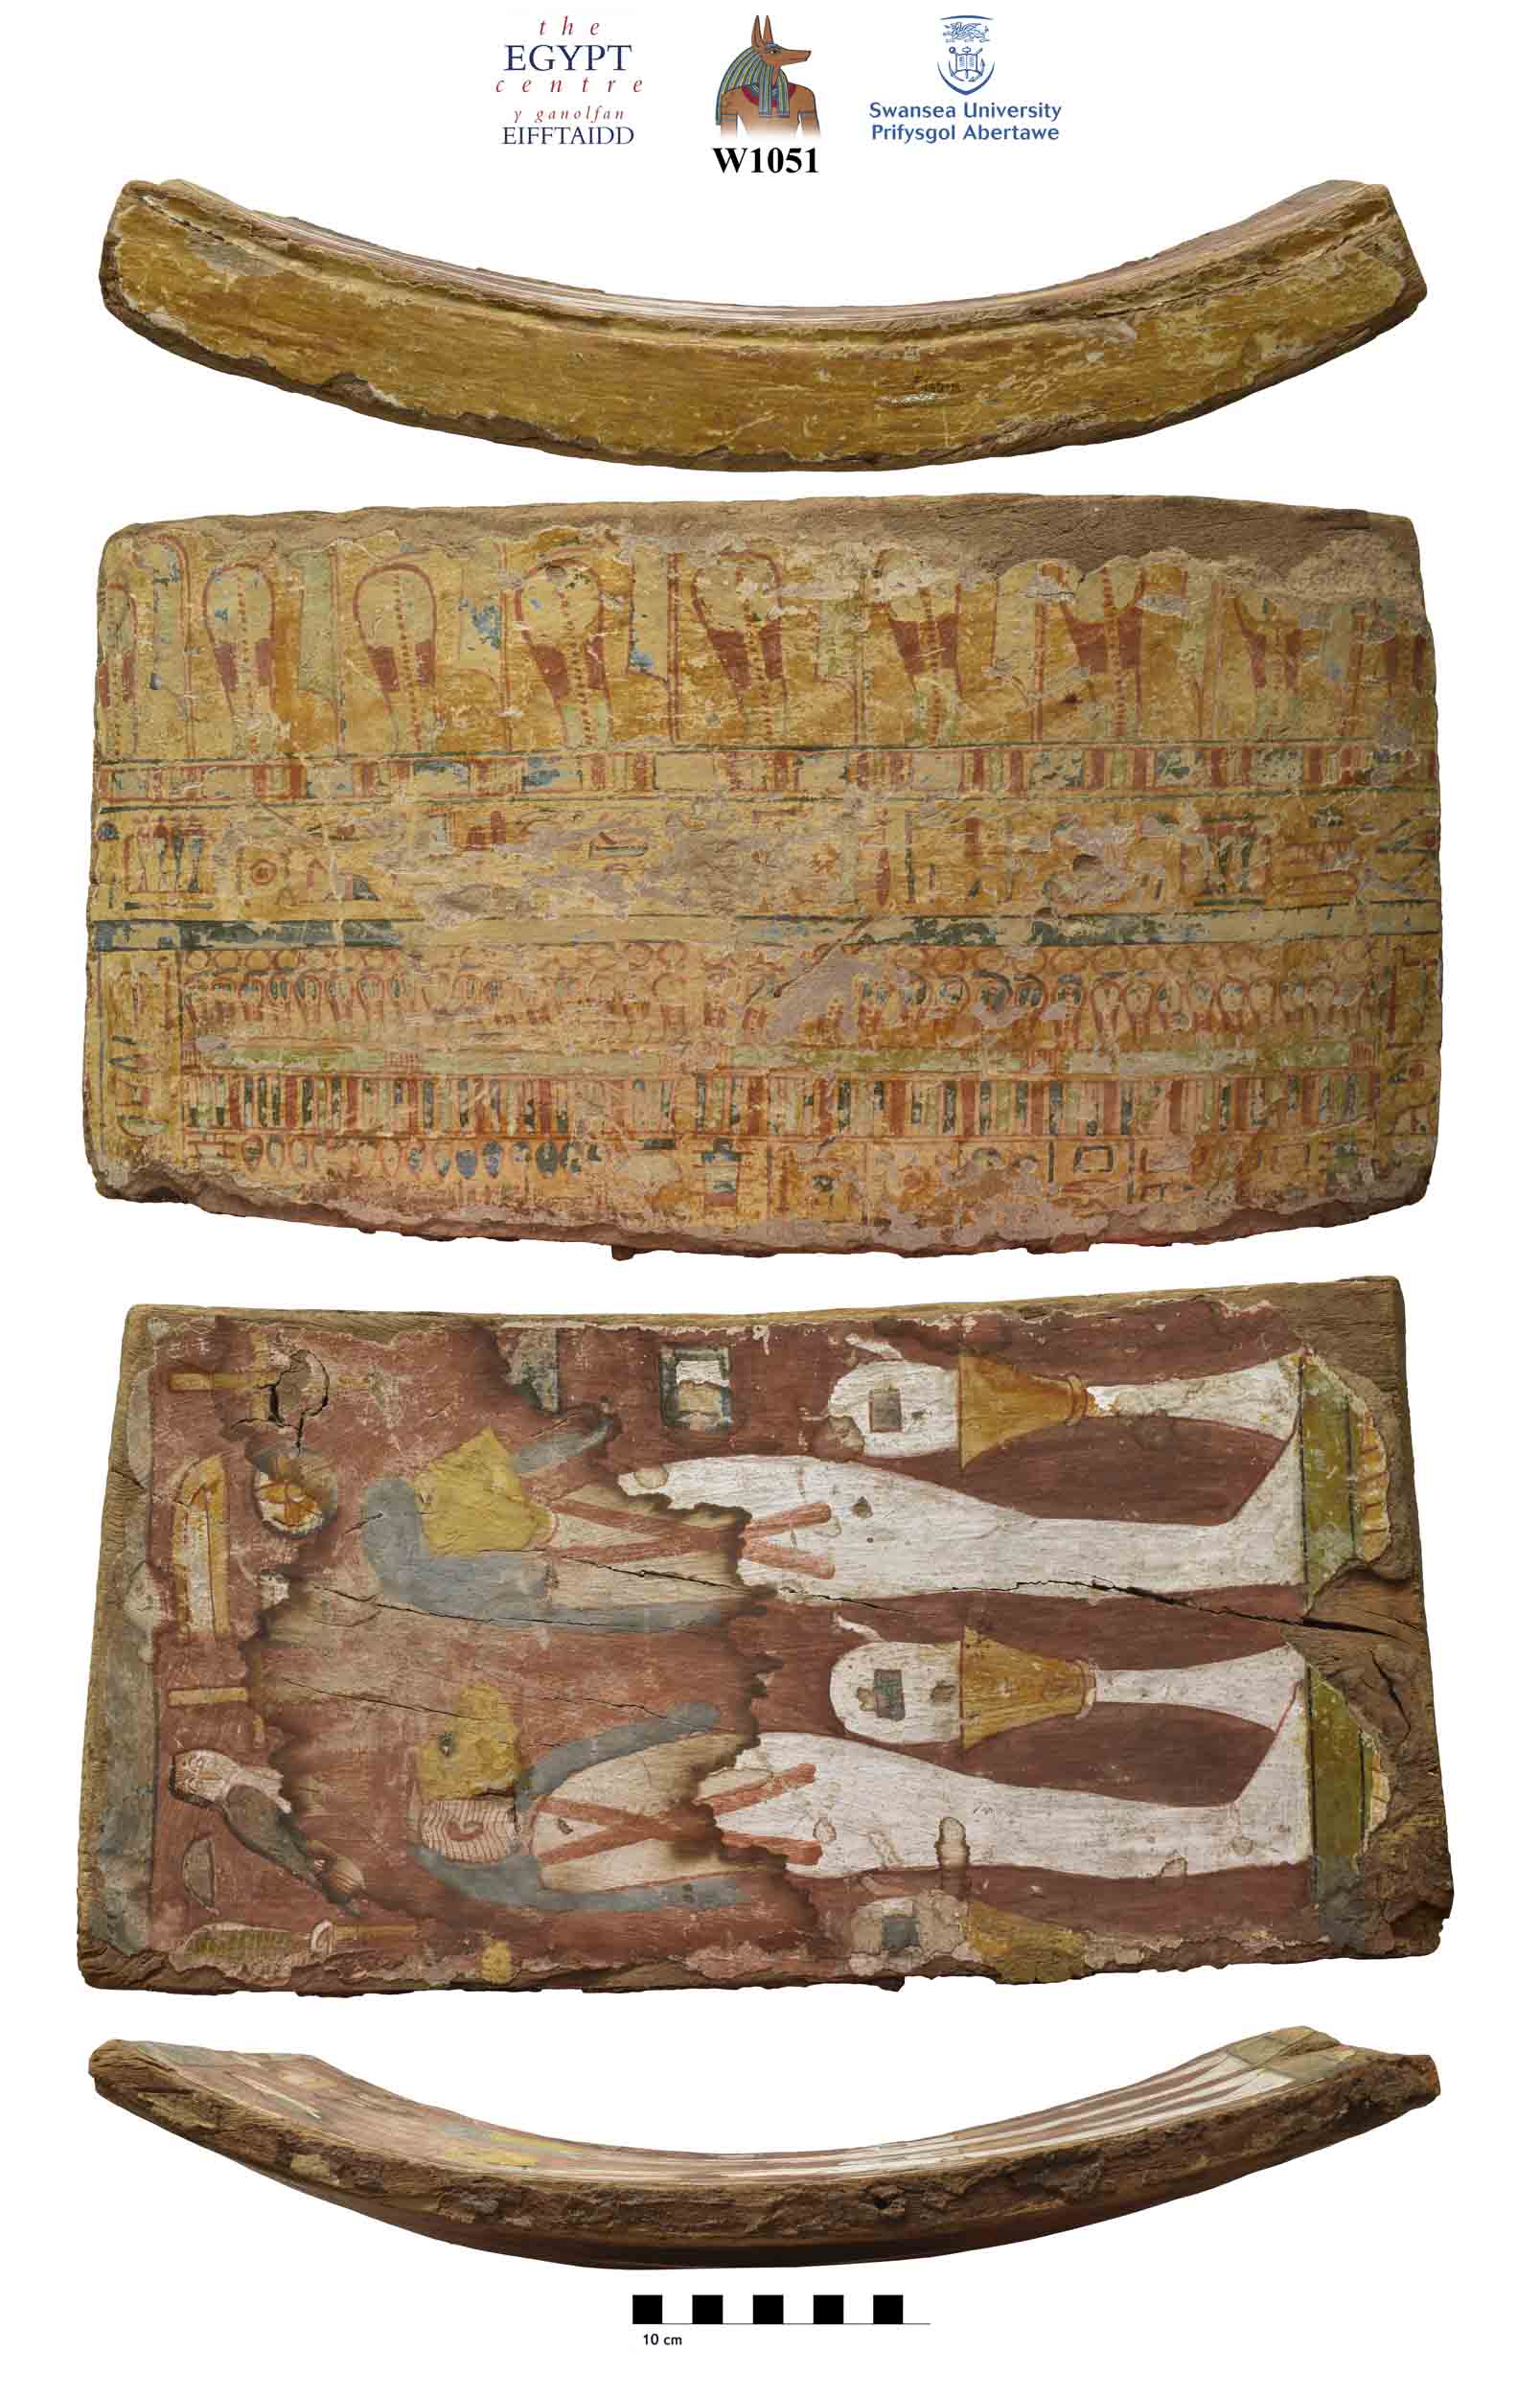 Image for: Fragment of a coffin